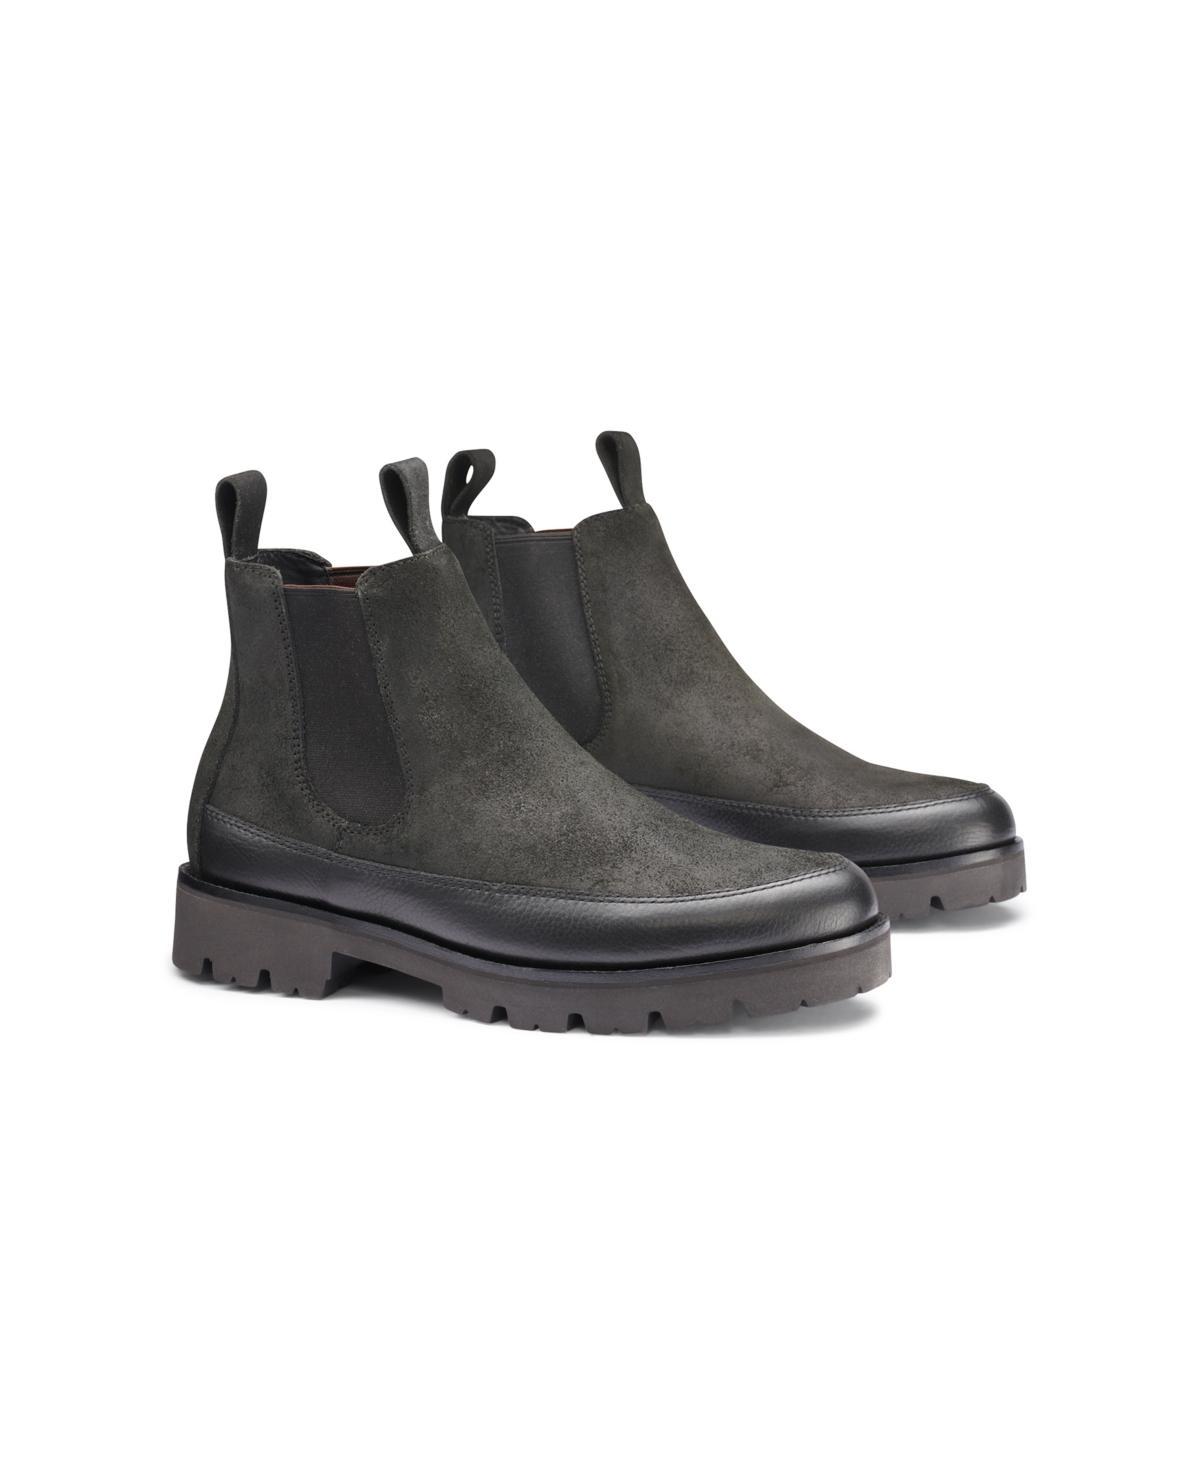 G.H. Bass Mens Ranger Chelsea Boots Product Image